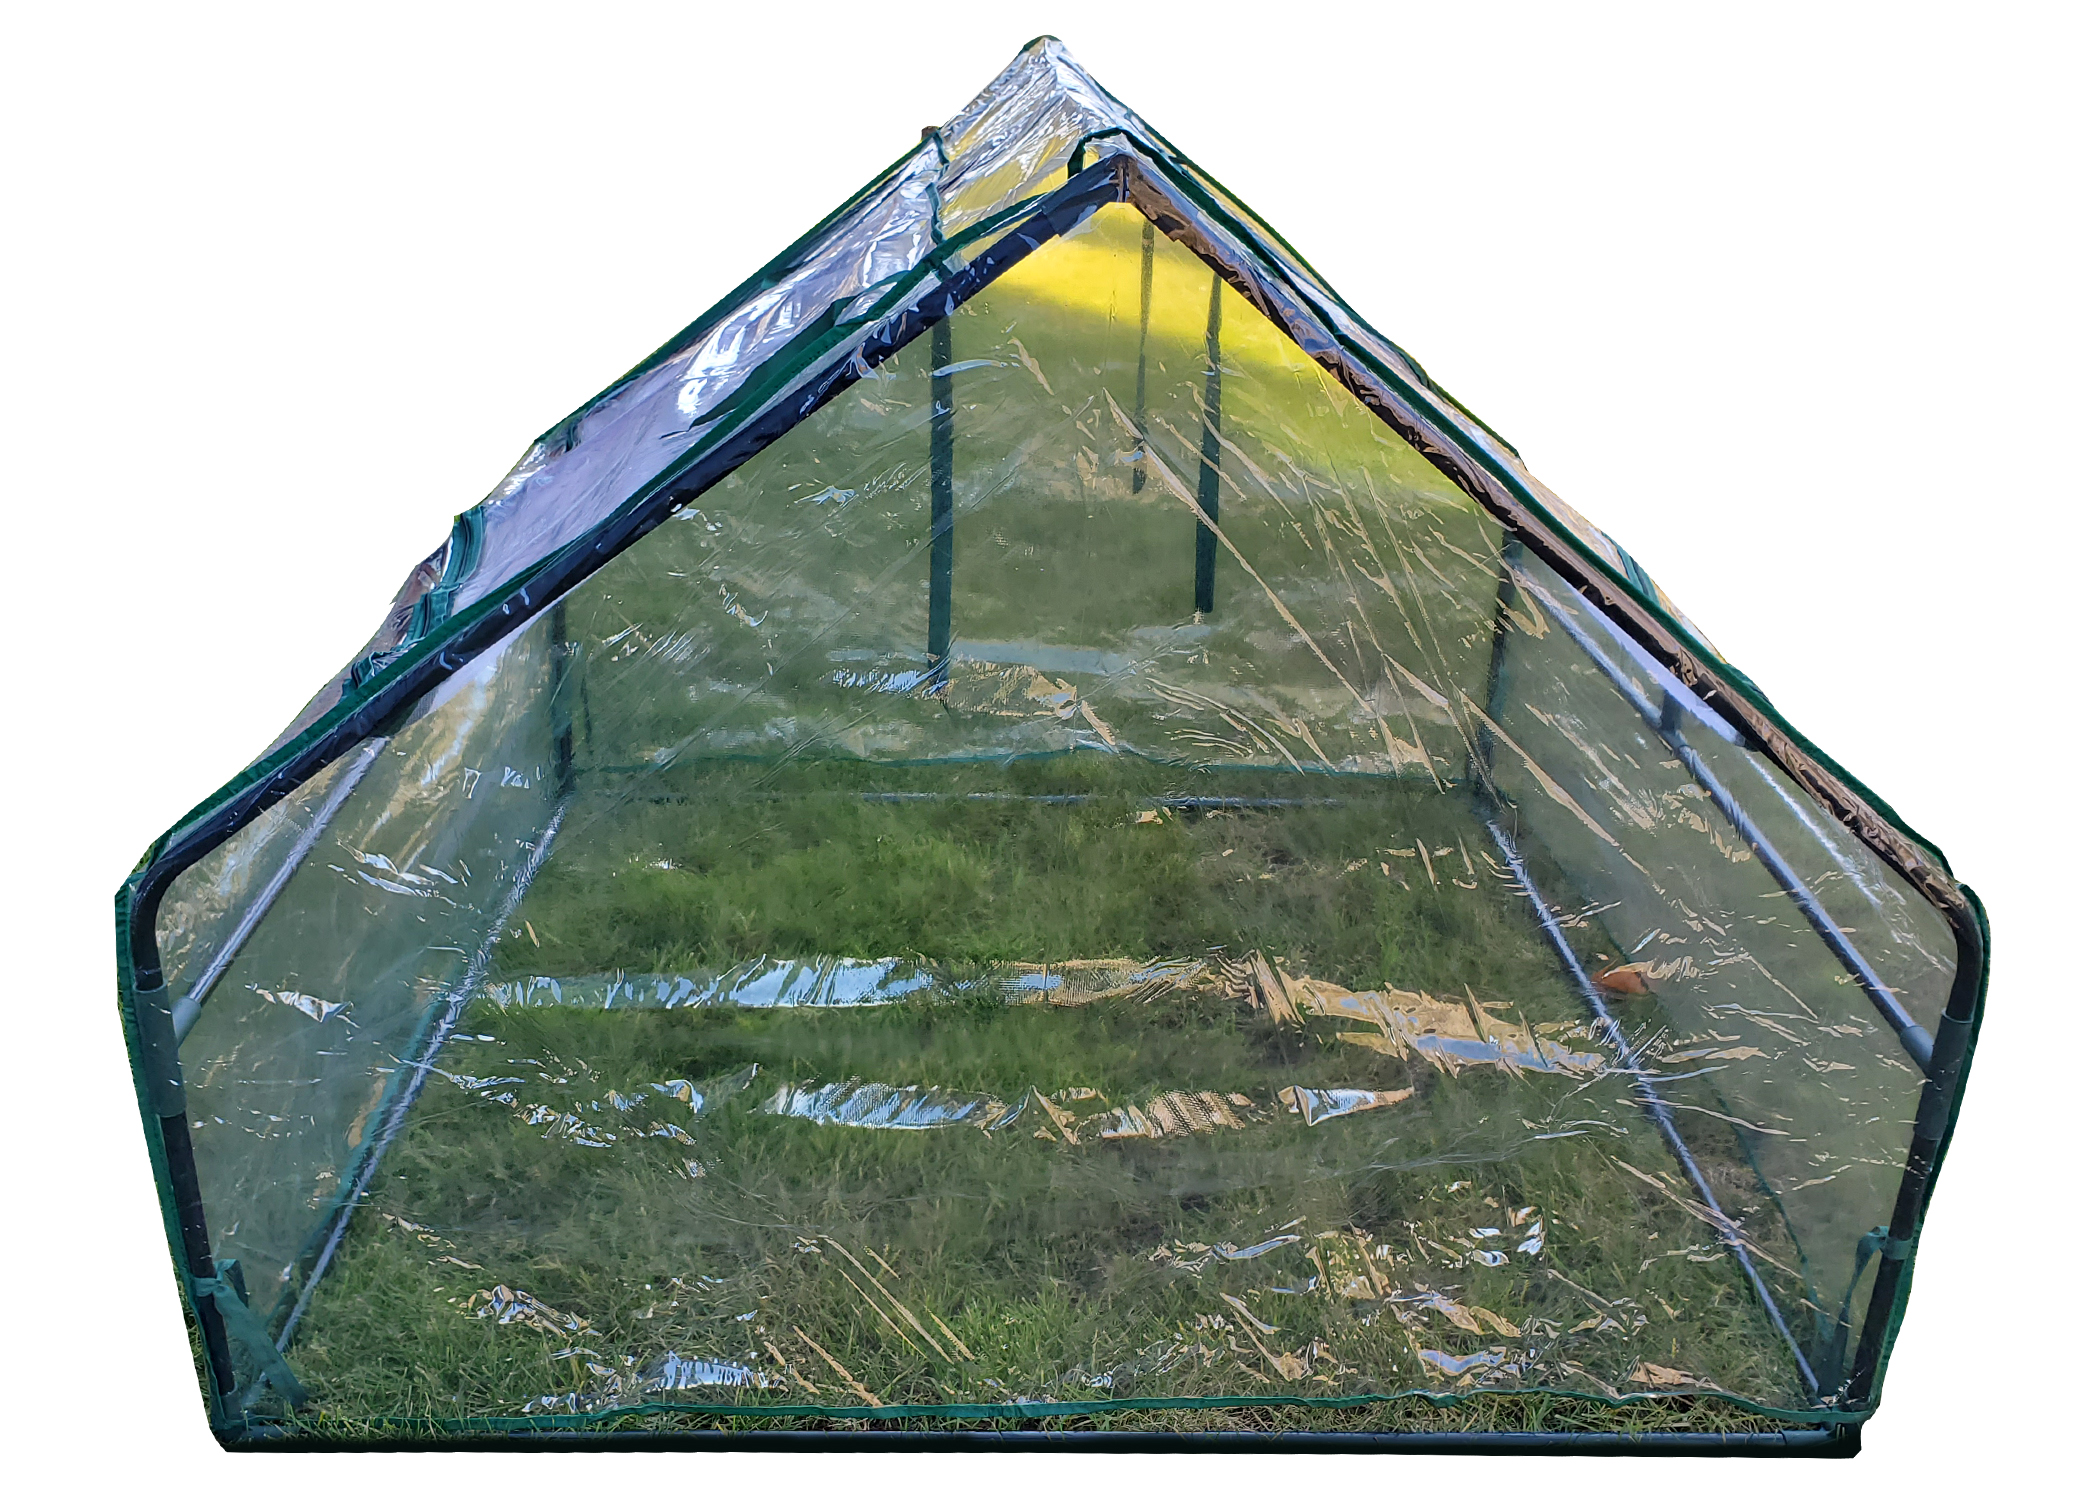 Zenport Mini Greenhouse SH3214A Greenhouse, 4-Feet by 4-Feet by 36-Inch - Click Image to Close